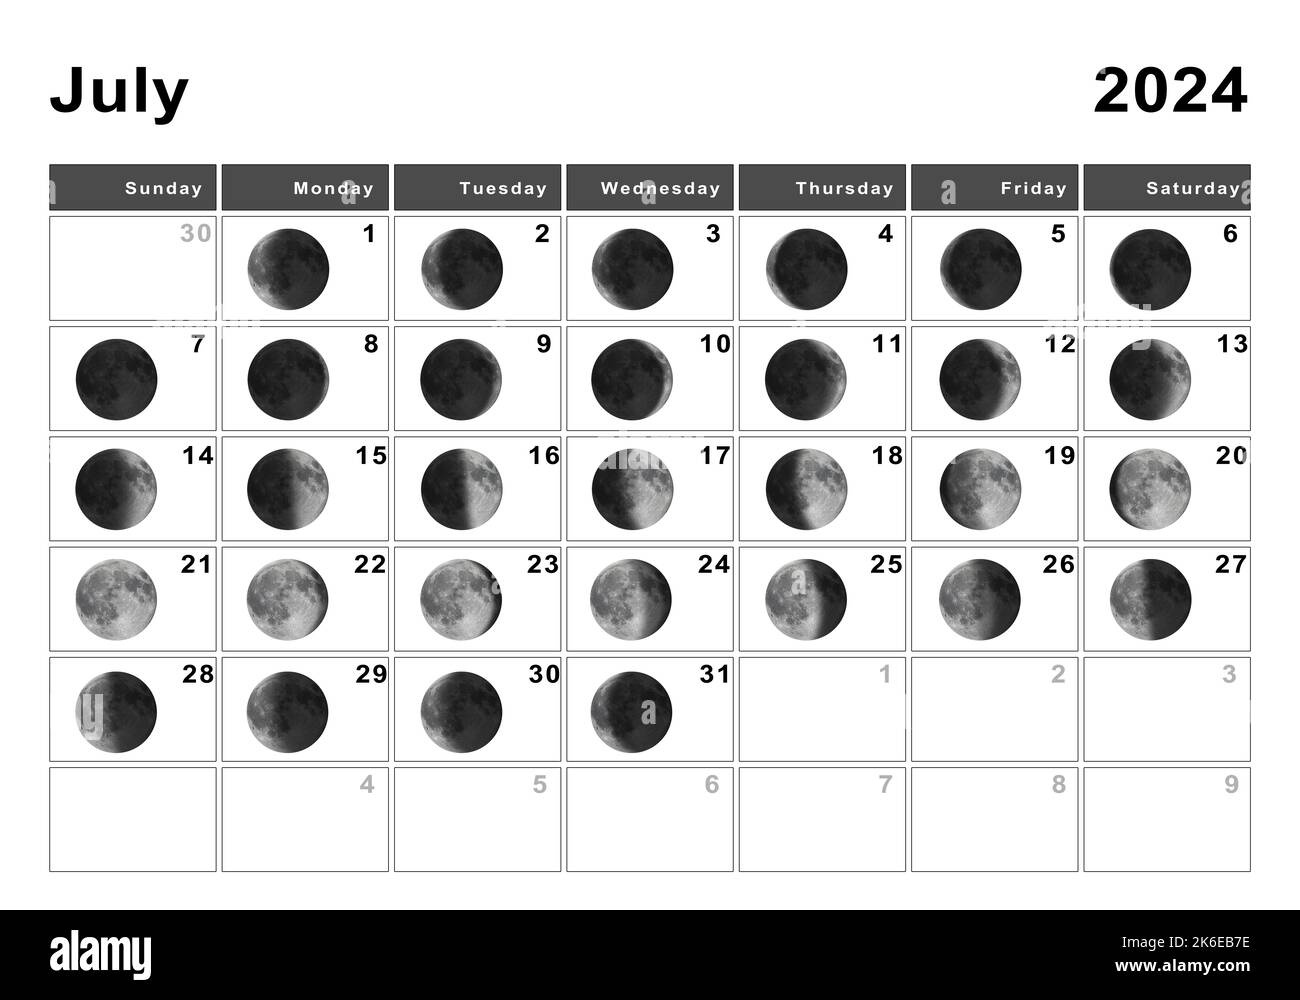 July 2024 Lunar Calendar, Moon Cycles, Moon Phases Stock Photo - Alamy intended for July 17 Lunar Calendar 2024